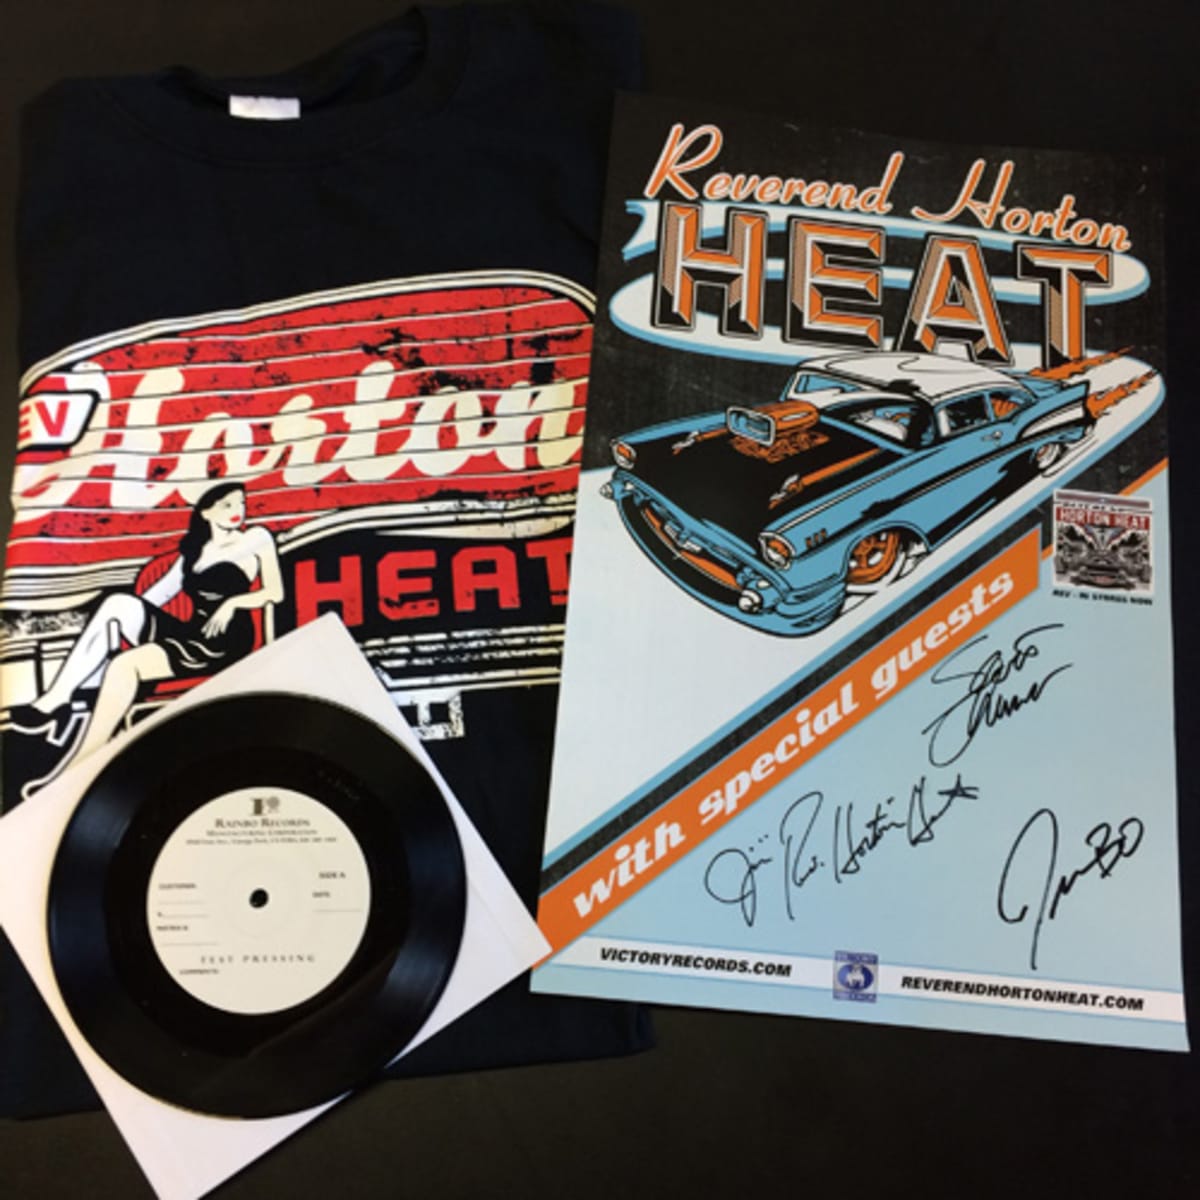 The Reverend Horton Heat - Victory Records